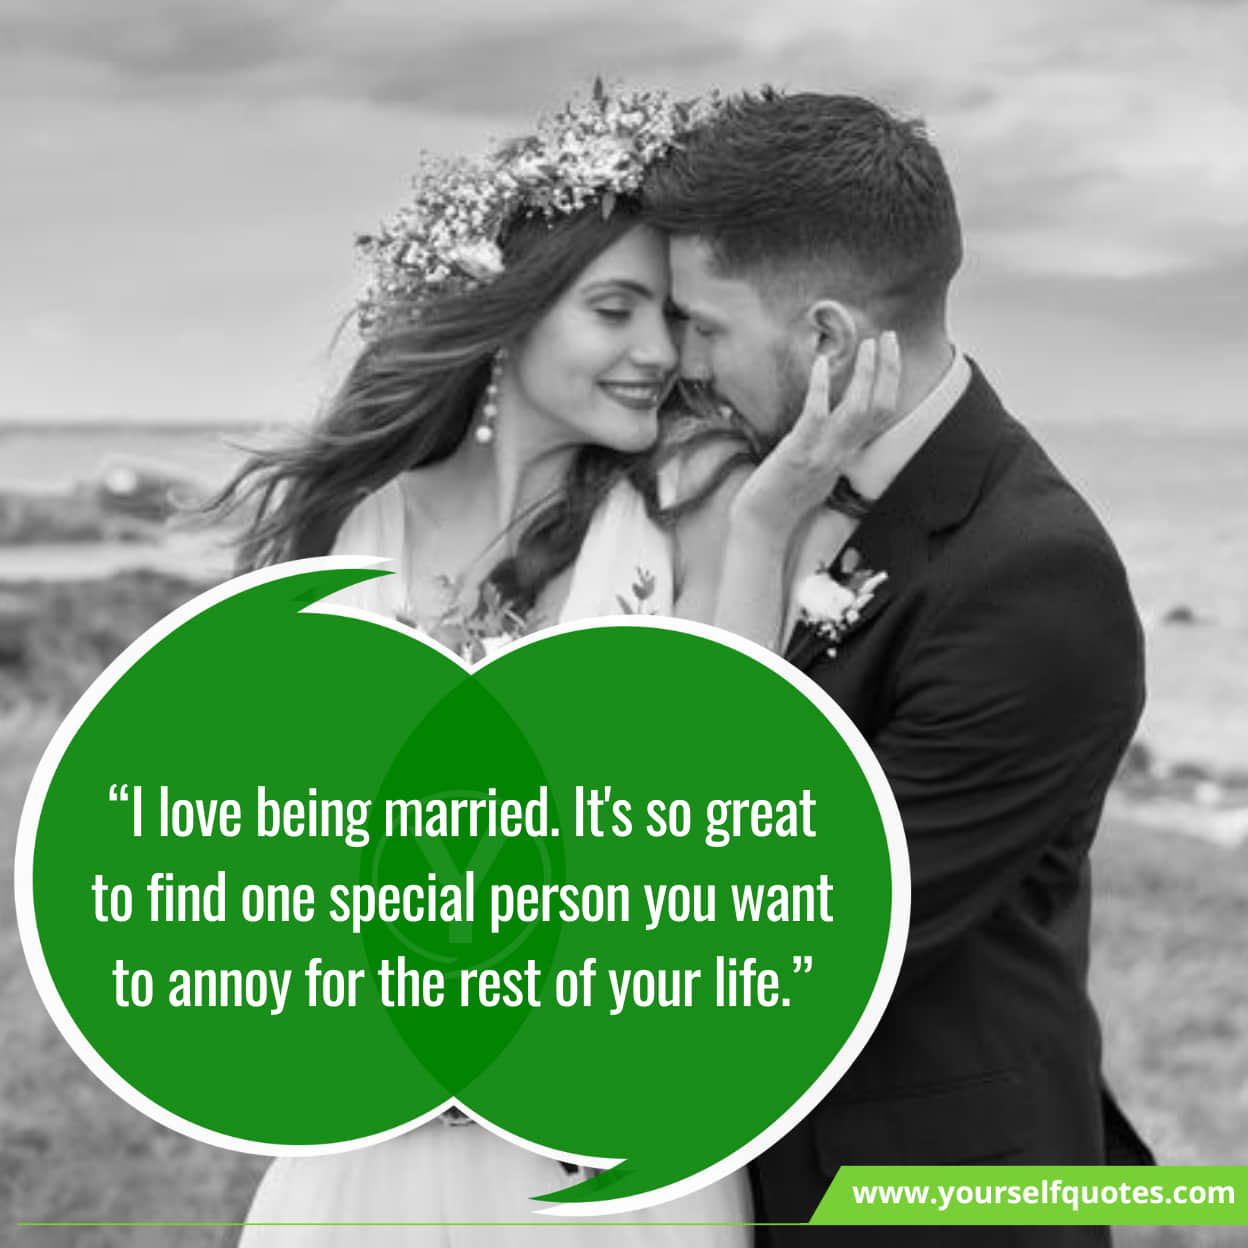 Sweet Wedding Quotes for Instagram